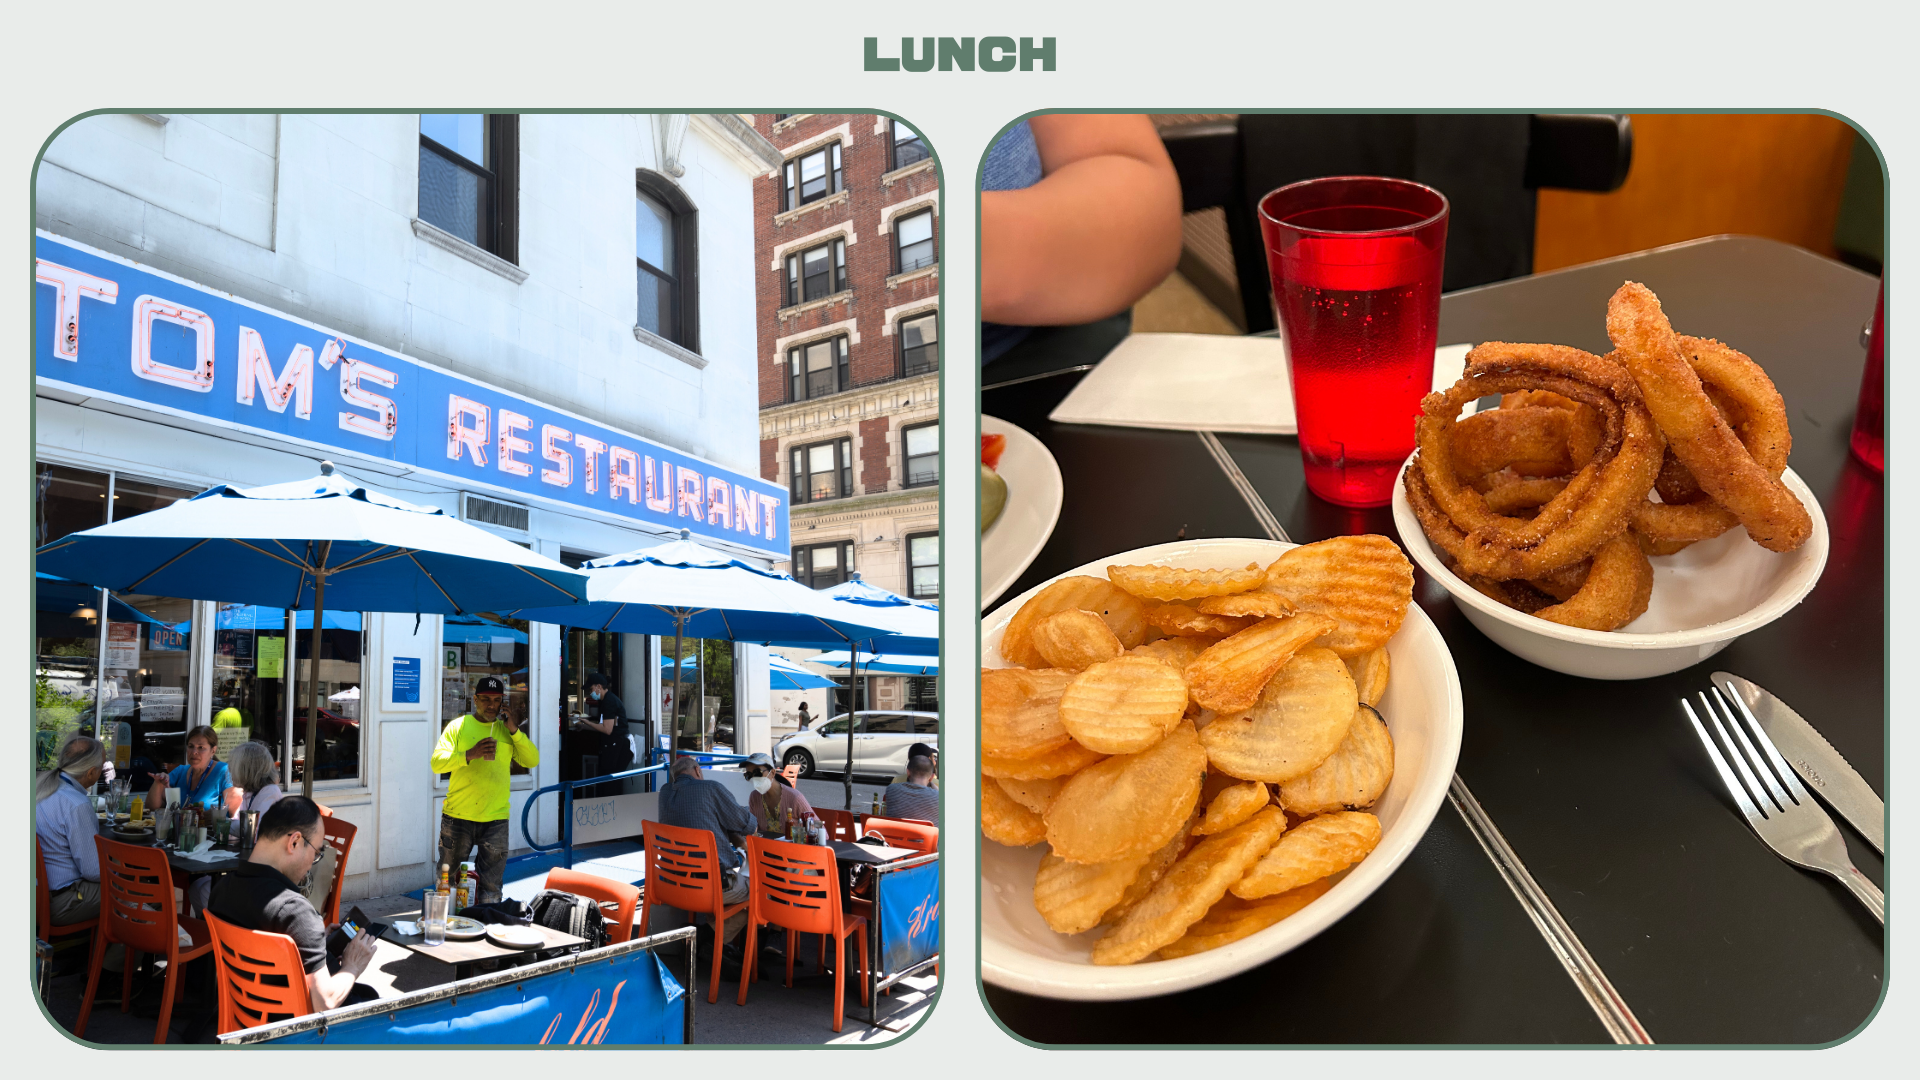 L: Exterior of Tom's Restaurant; R: Fries and onion rings at S&P Lunch